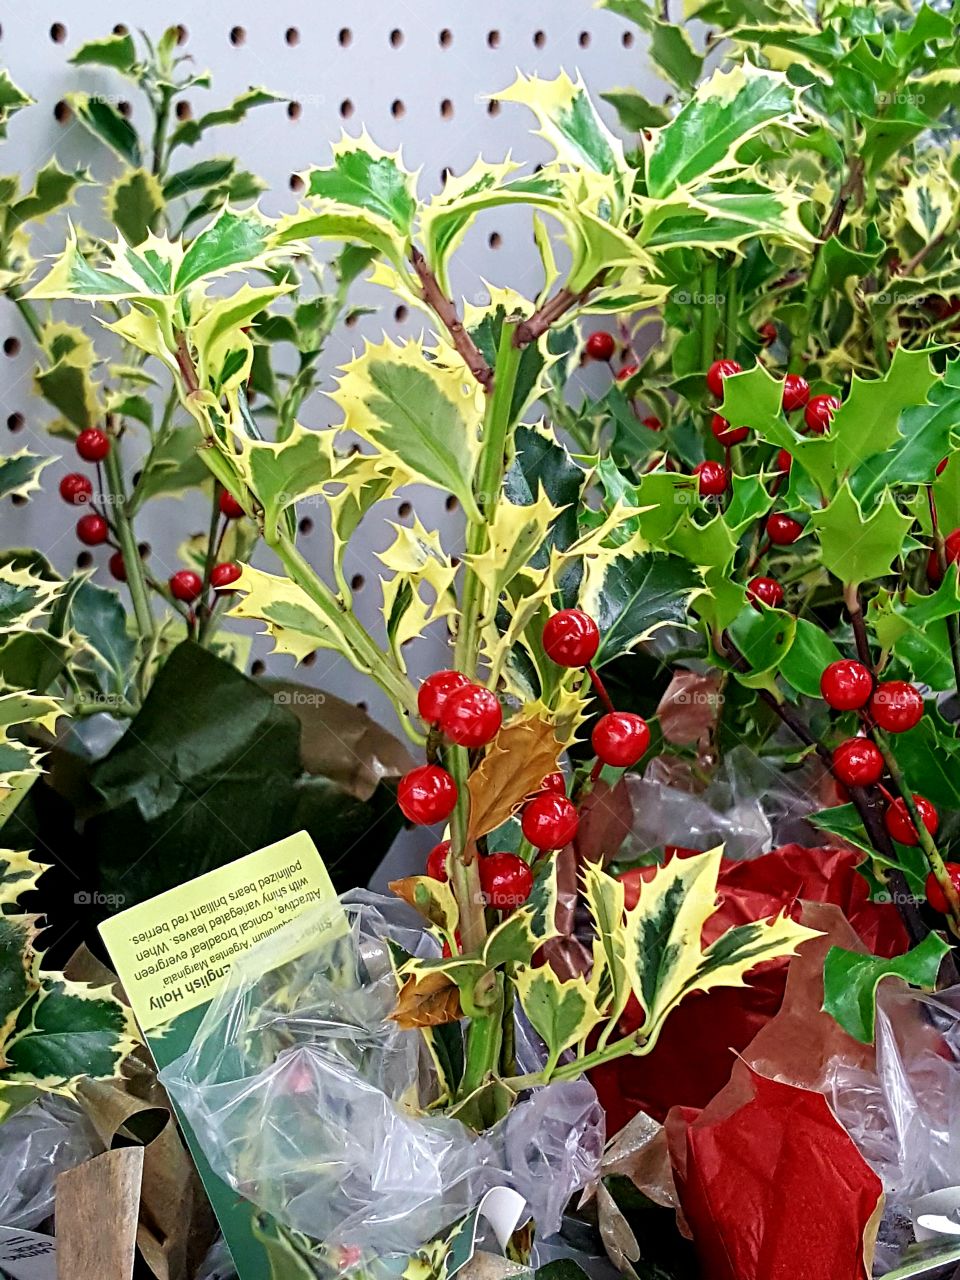 I wasn't sure if this holly I found at the store was real; it was so fake looking. Just the berries are fake though.